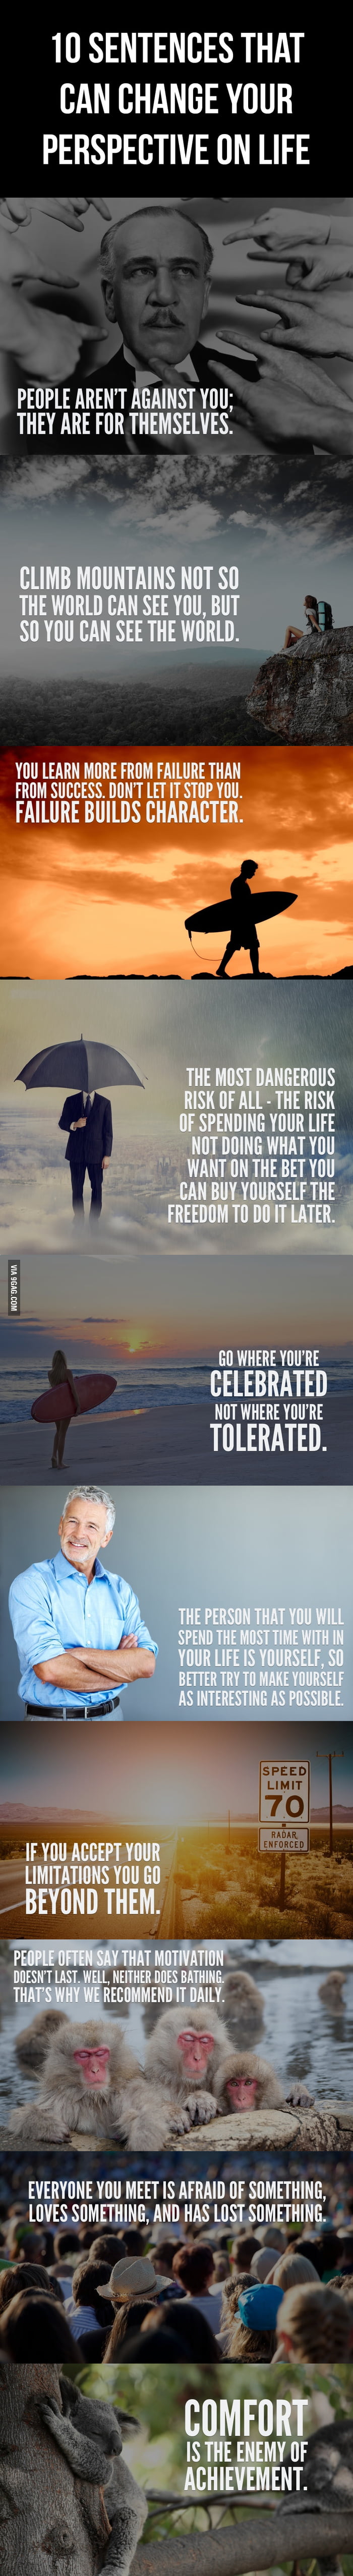 10 Sentences That Can Change Your Perspective On Life - 9GAG